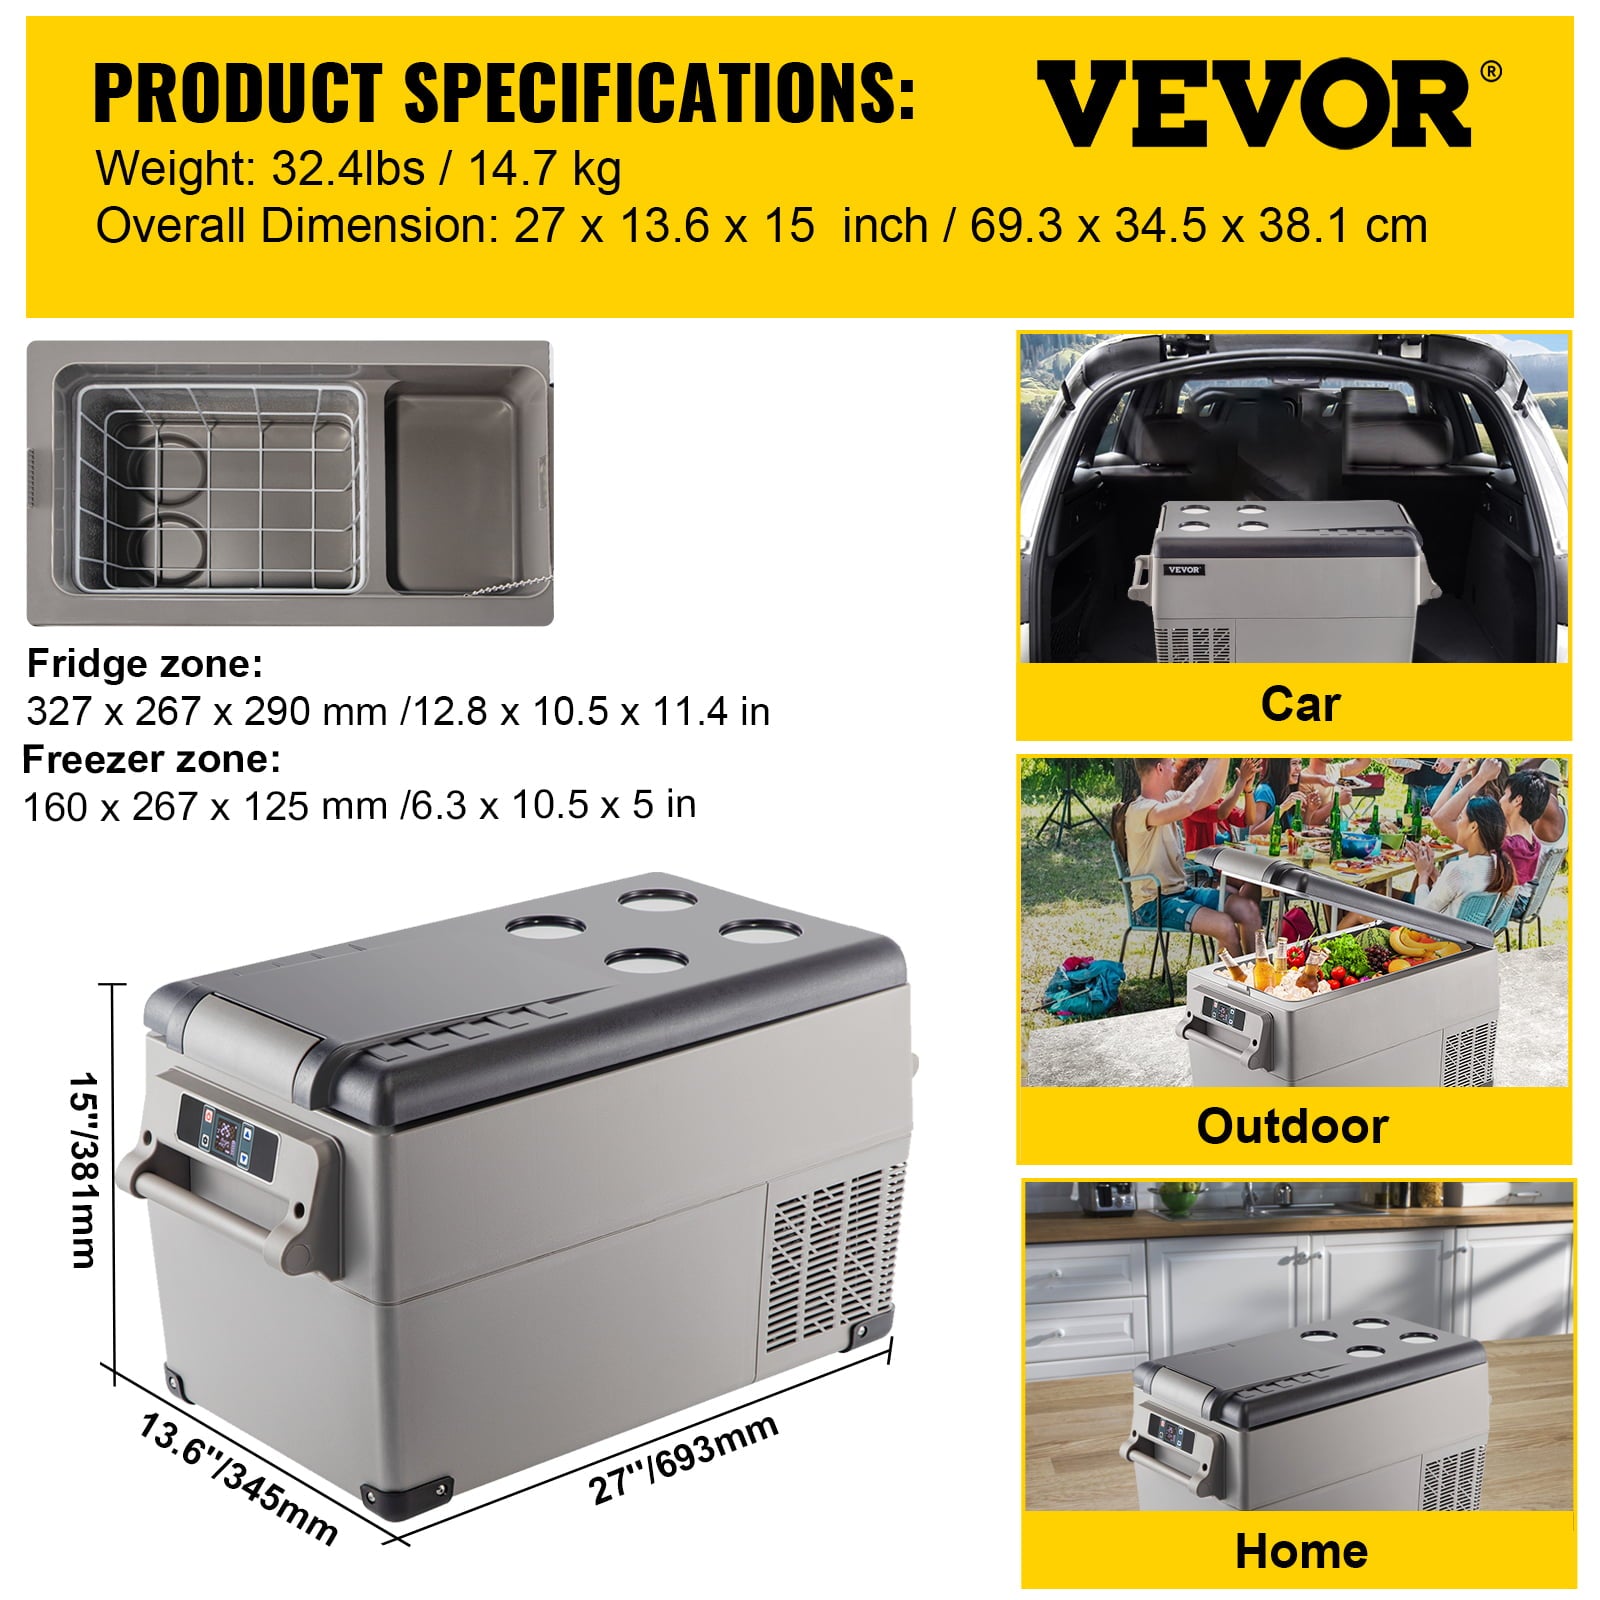 VEVOR 35L Portable Car Refrigerator 37 Quart Compact RV Fridge 12/24V DC & 110-240V AC Vehicle Car Truck Boat Mini Electric Freezer for Driving Travel Fishing Outdoor and Home Use -4°F-50°F